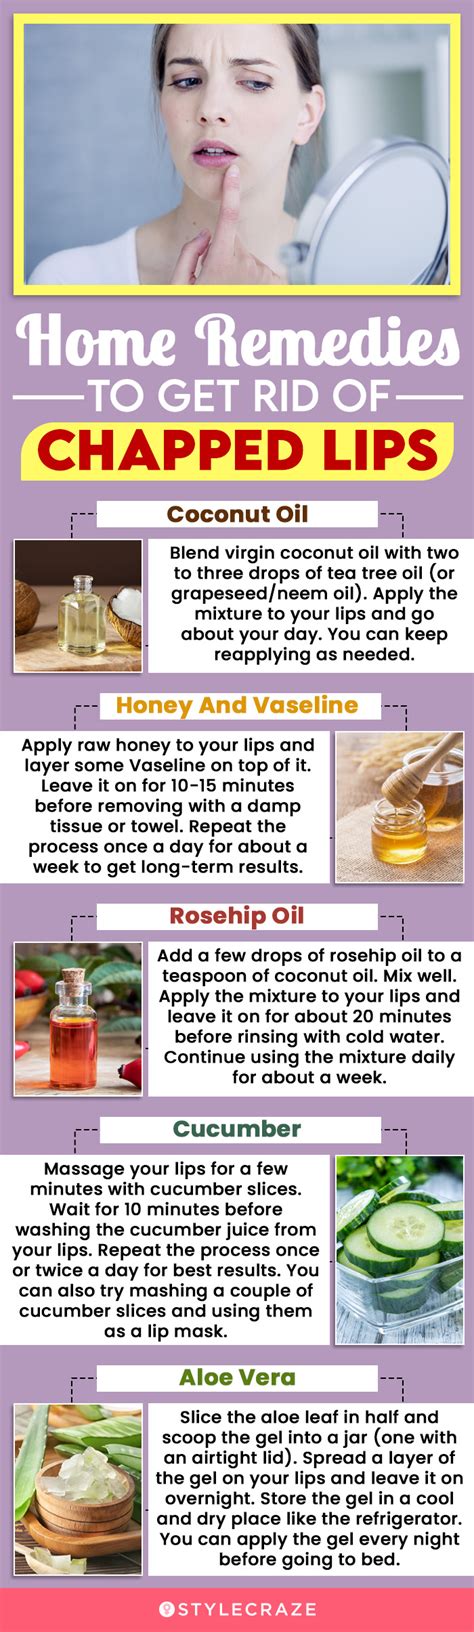 Get Rid Of Chapped Lips Fast Using These 11 Home Remedies